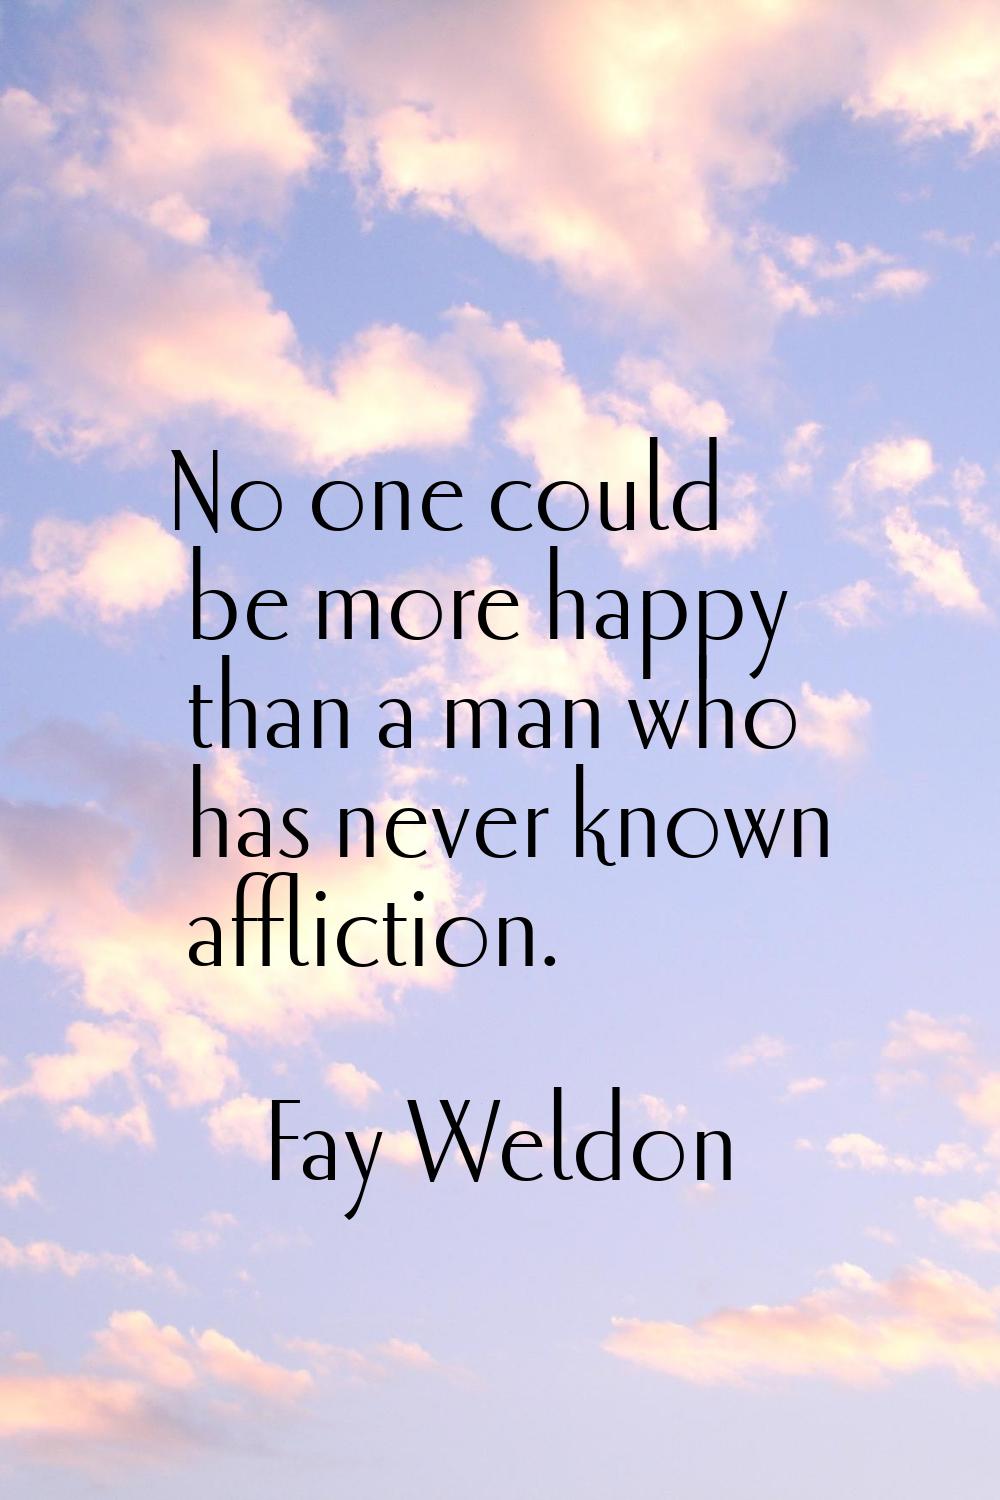 No one could be more happy than a man who has never known affliction.